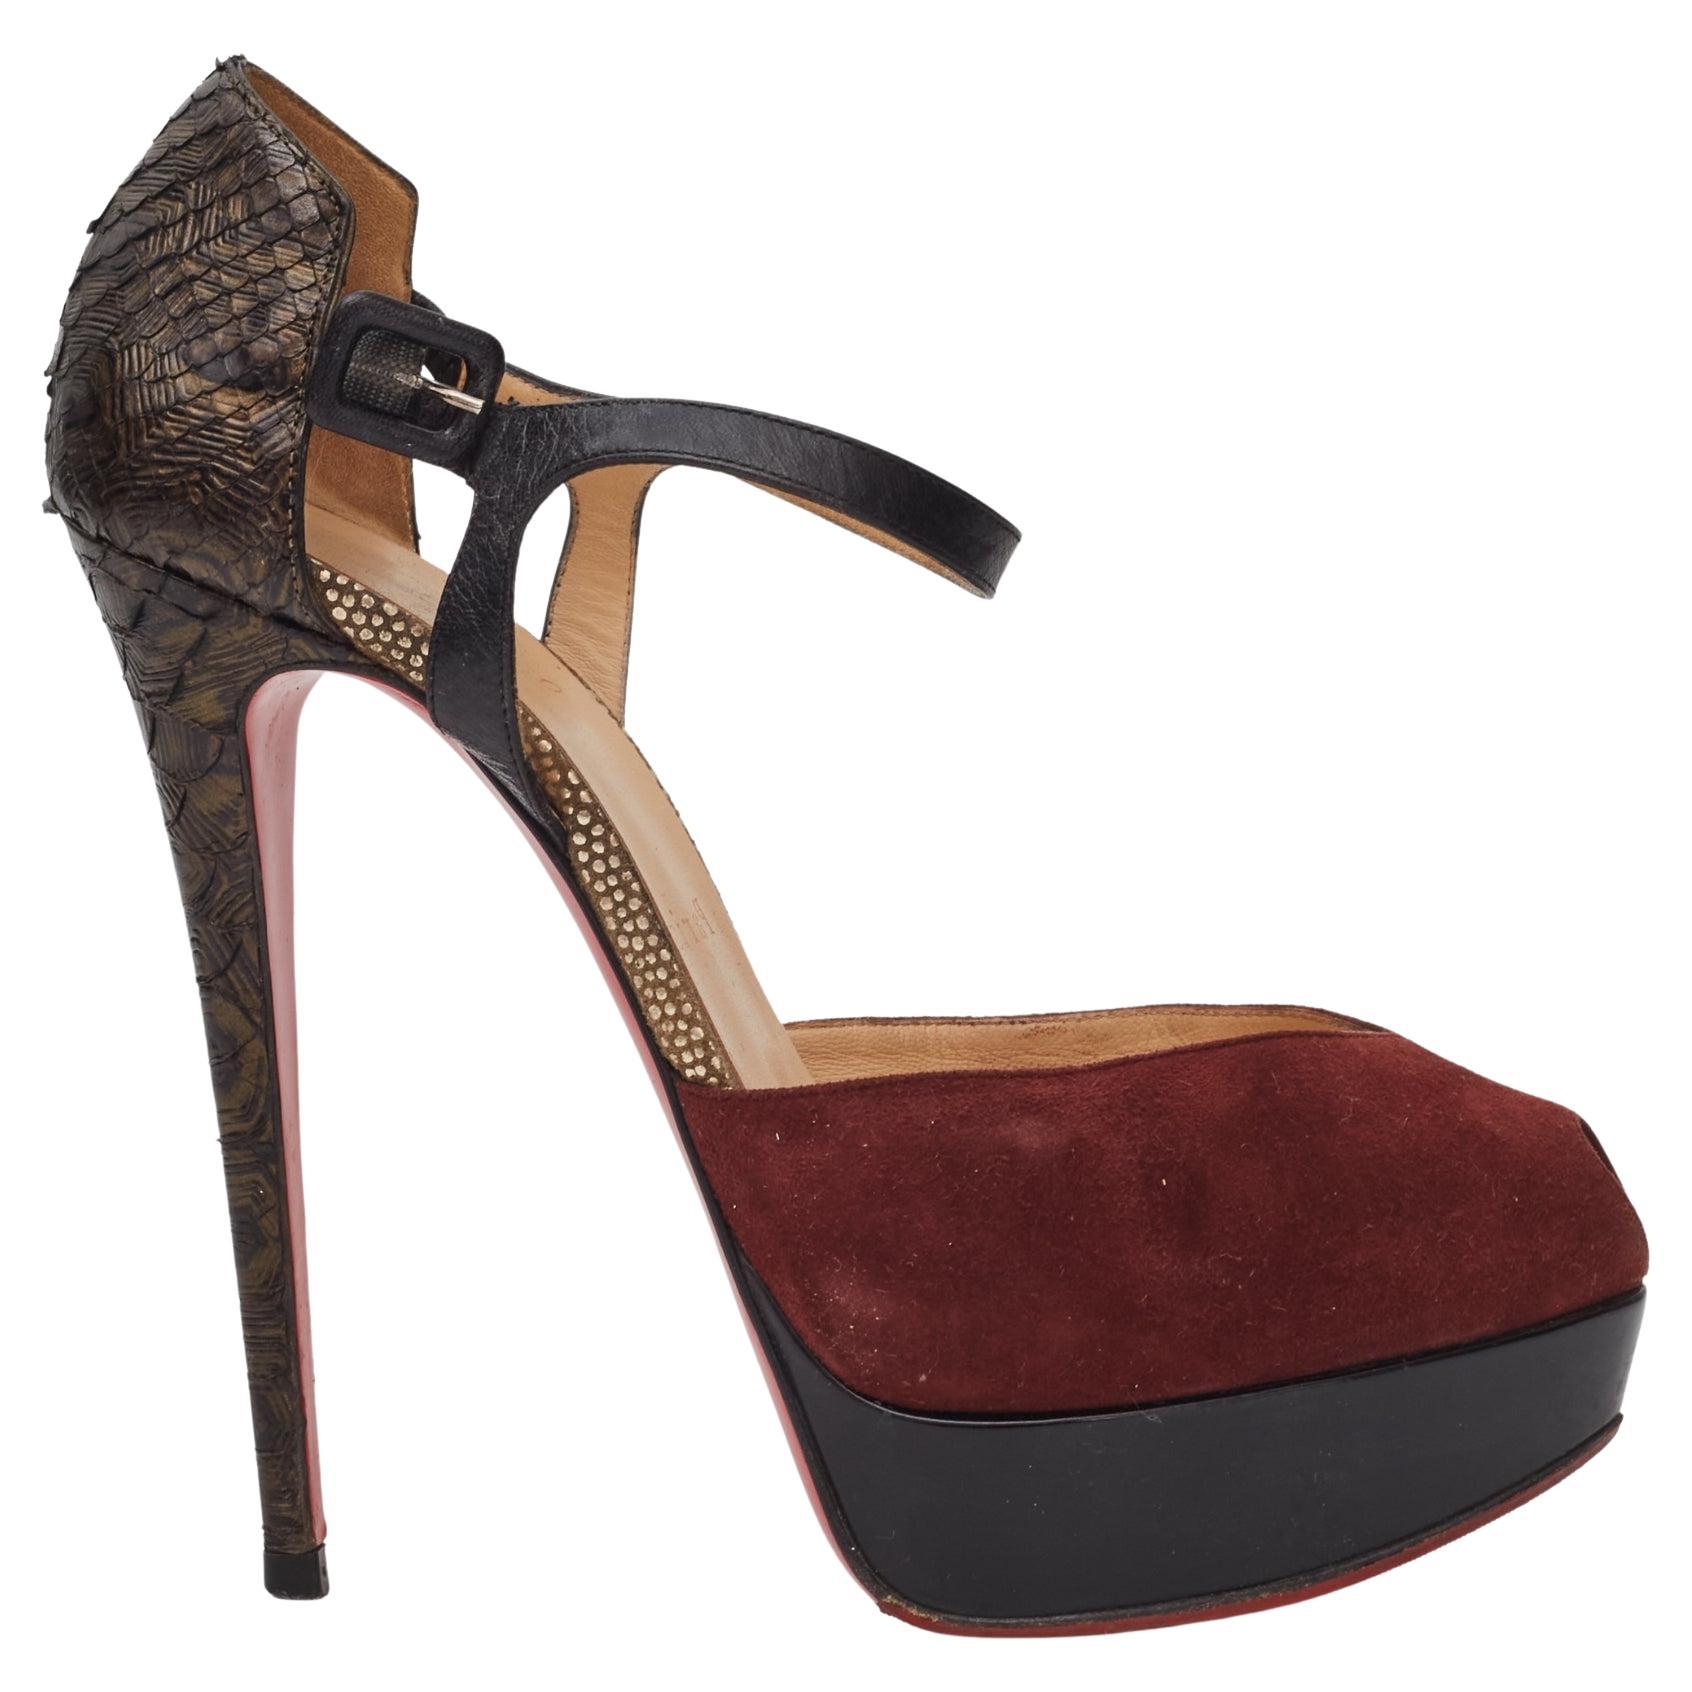 Christian Louboutin New Reptile Embossed Leather Shoes 39.5 - 6.5